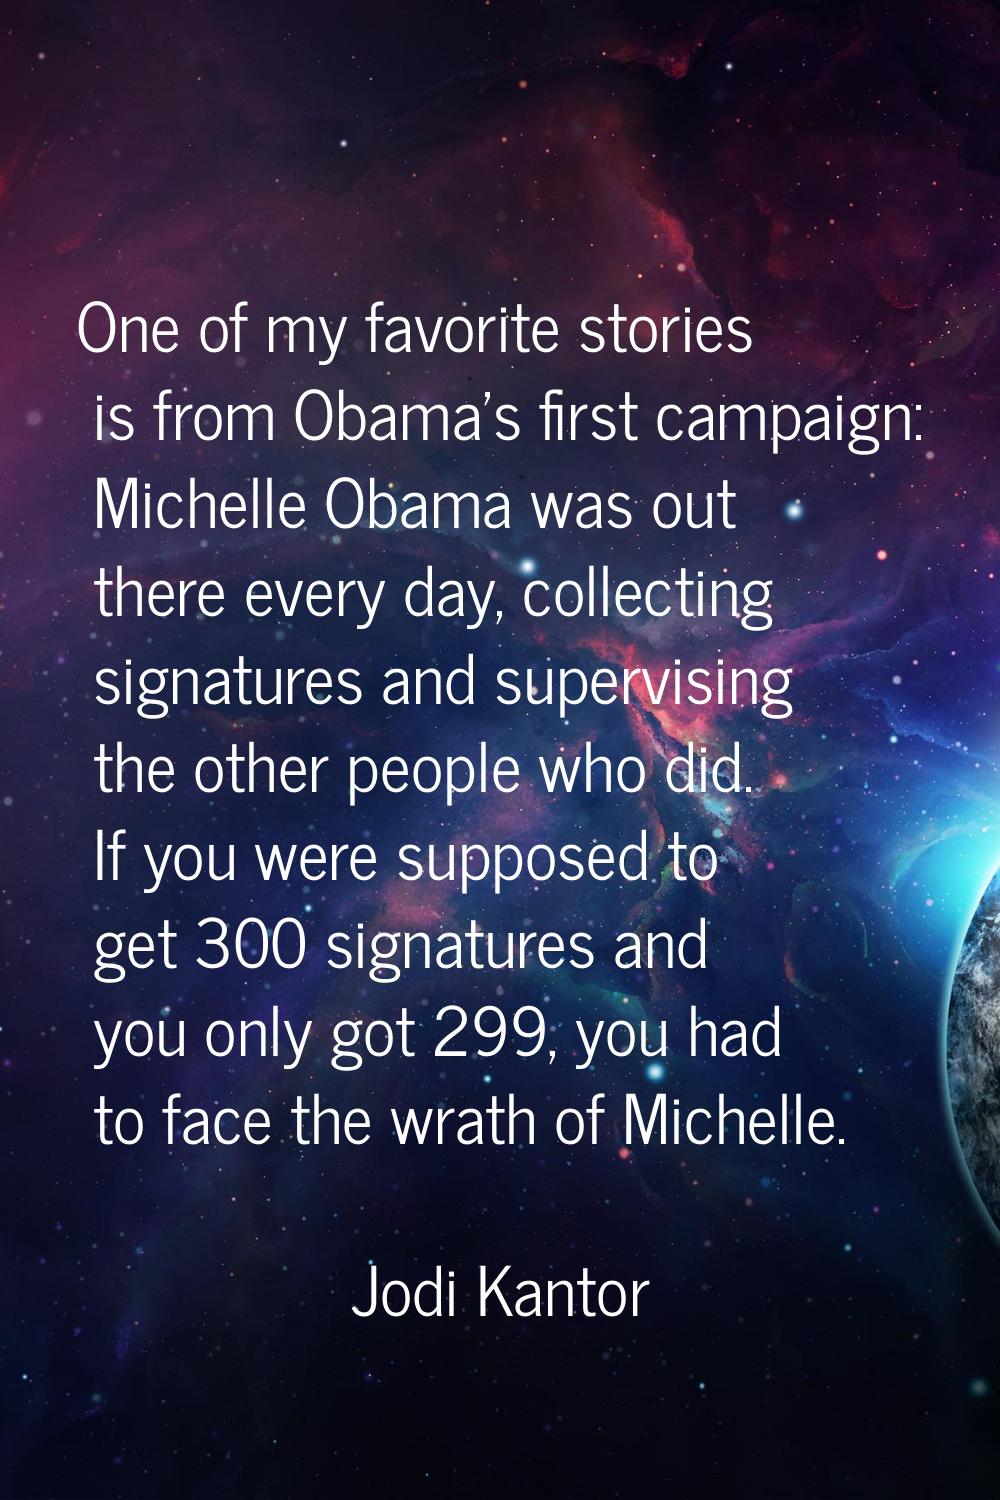 One of my favorite stories is from Obama's first campaign: Michelle Obama was out there every day, 